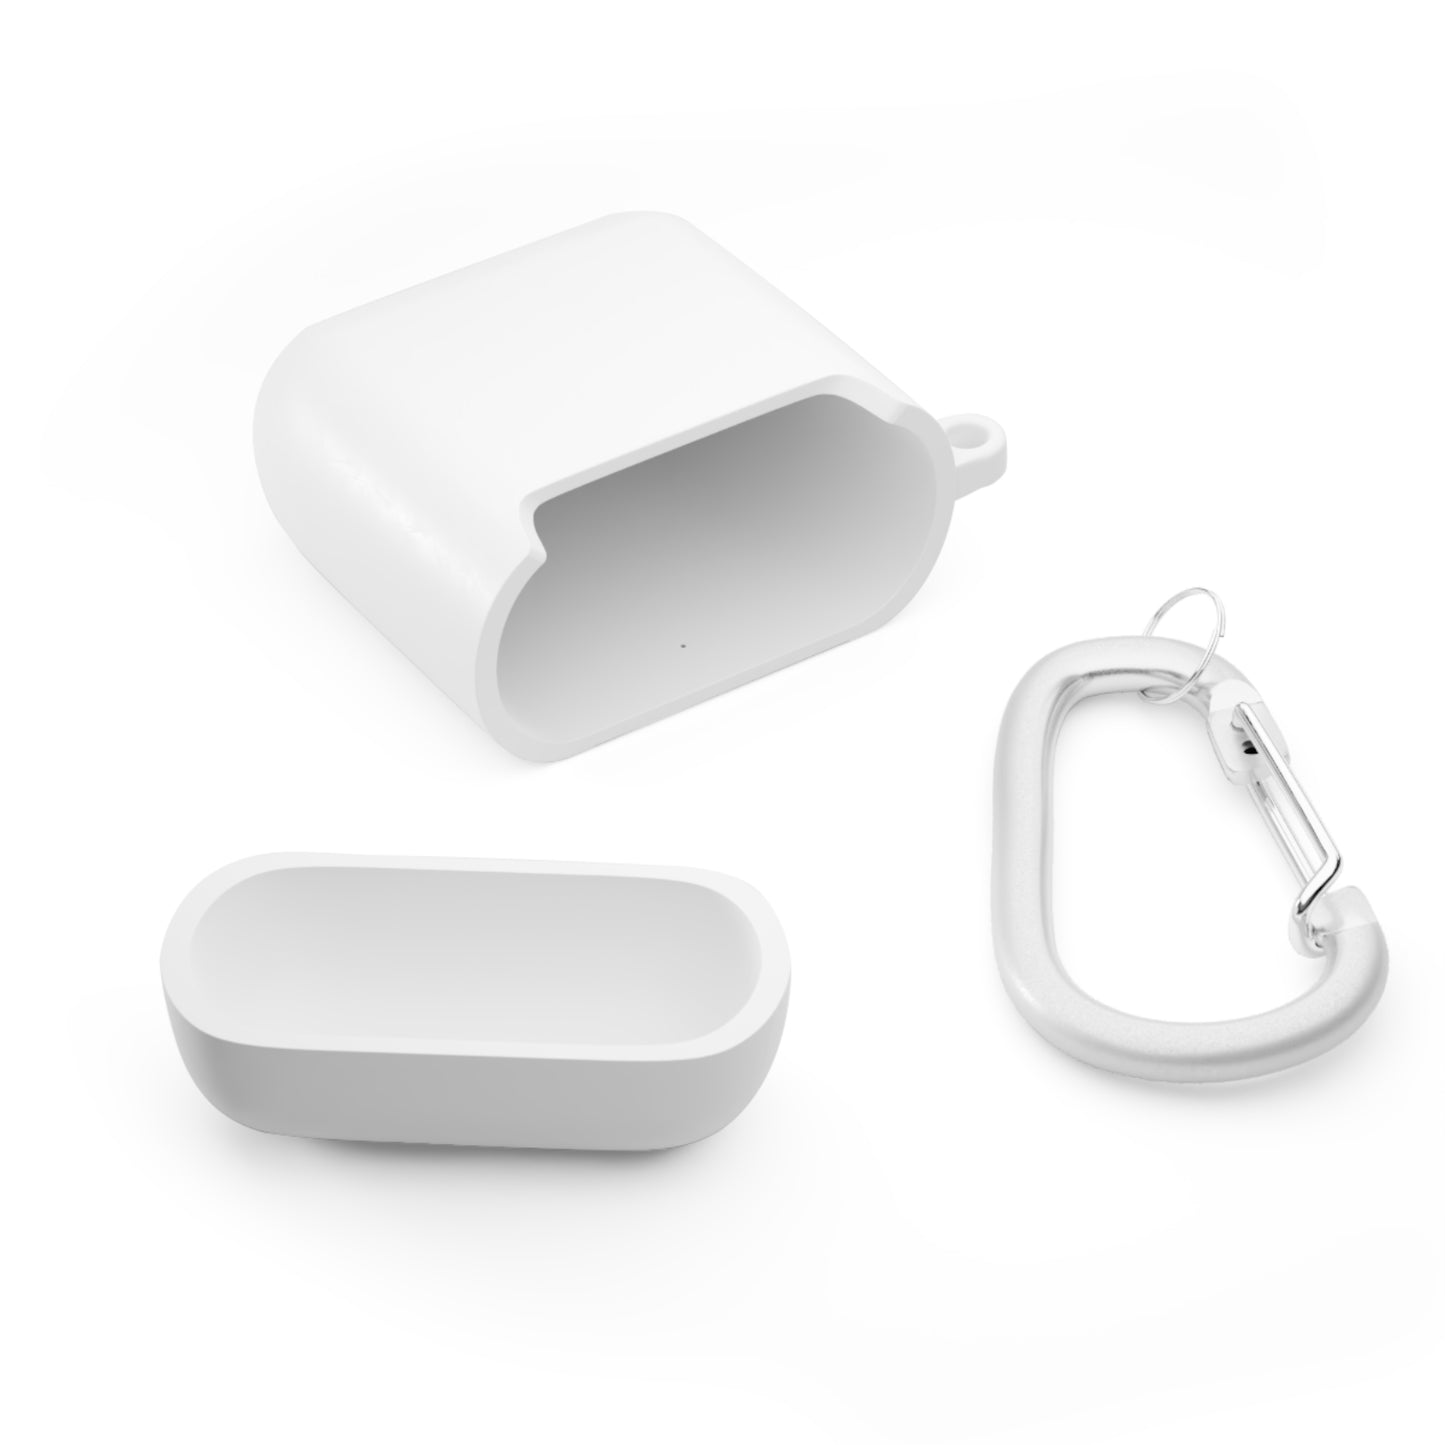 God Above All Things Airpod / Airpods Pro Case cover